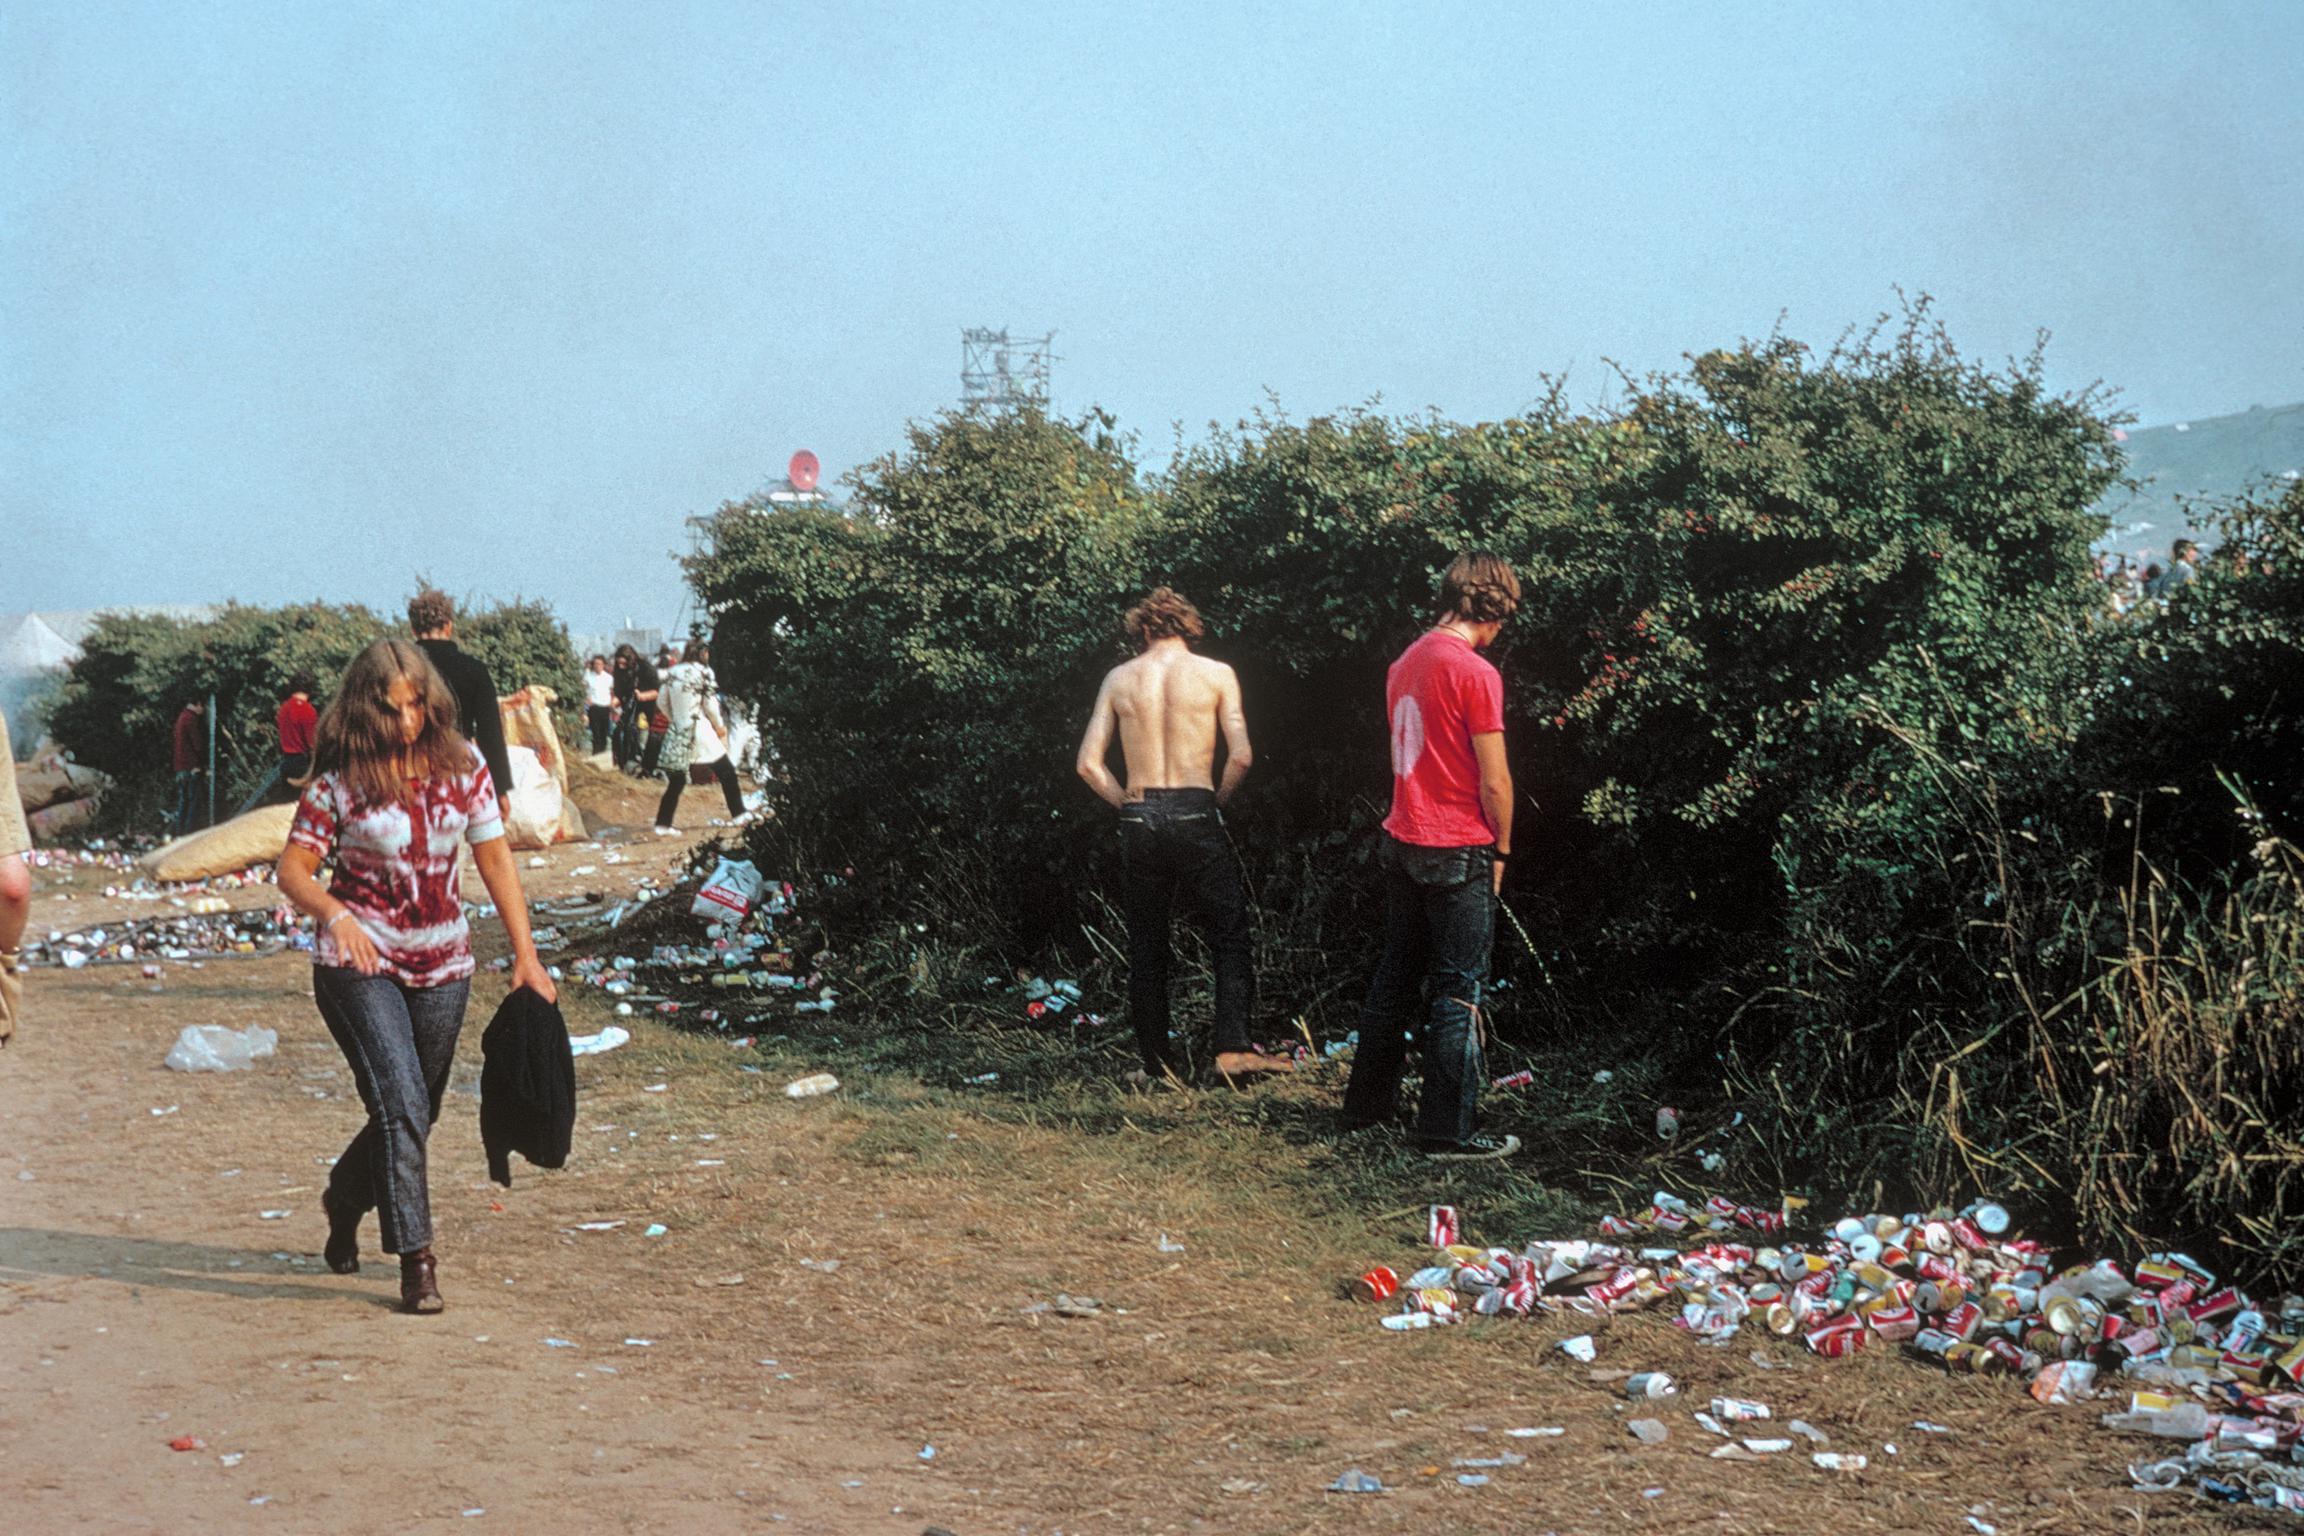 Isle of Wight Festival. Going to the toilet. Some get impatient and do the best they can